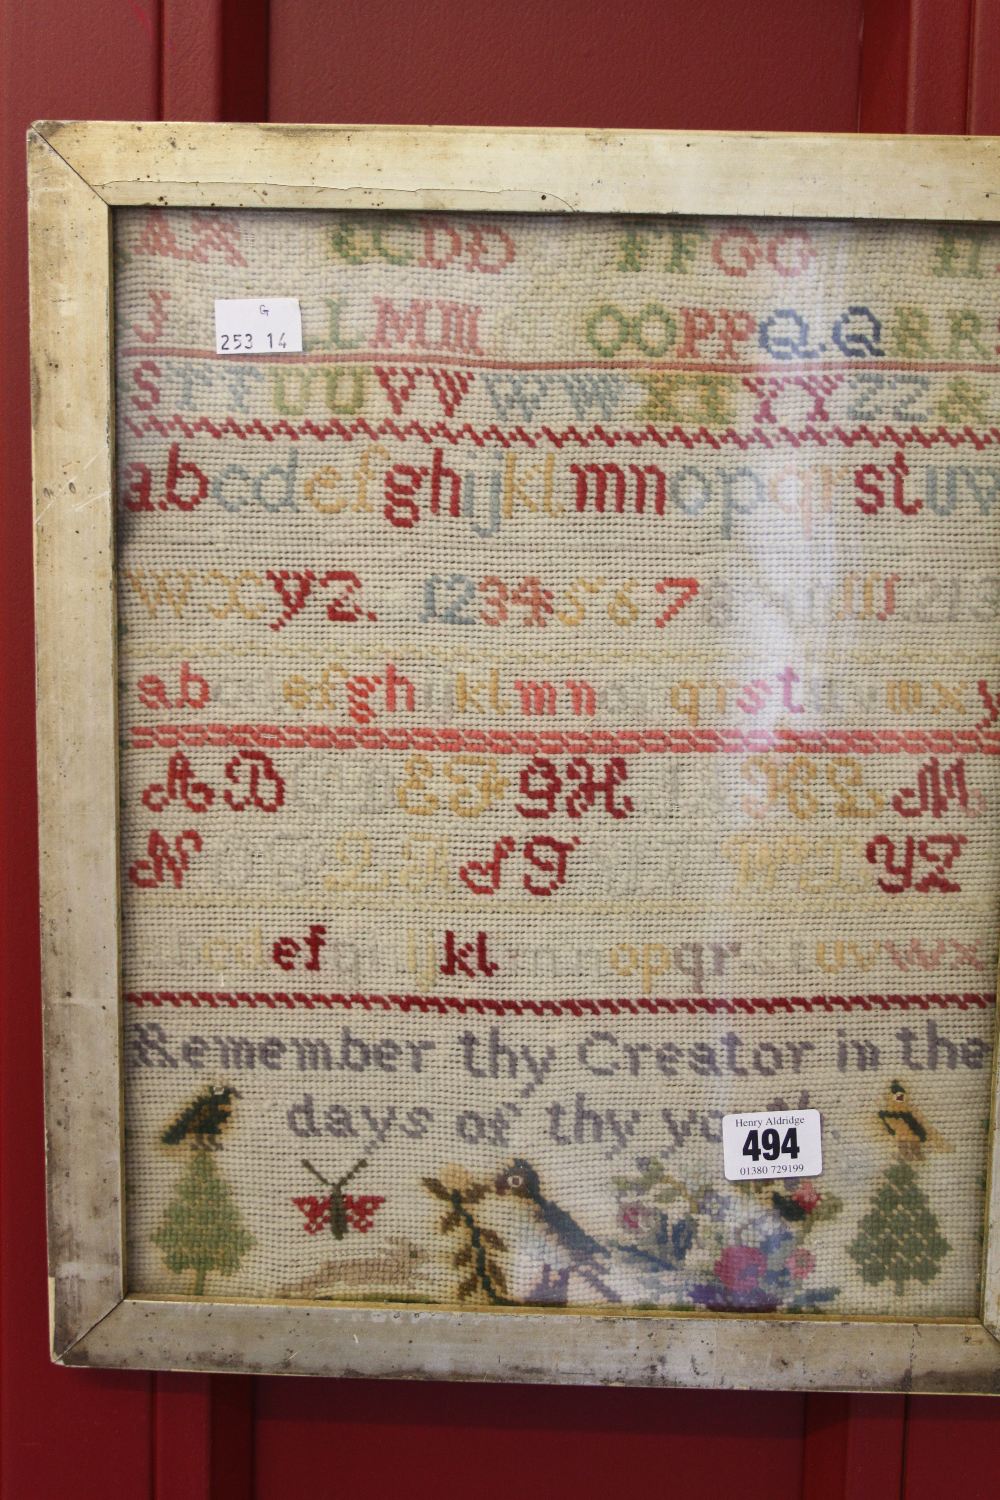 Early 19th cent. Sampler with alphabet and biblical verse, framed and glazed, 11ins. x 14ins.